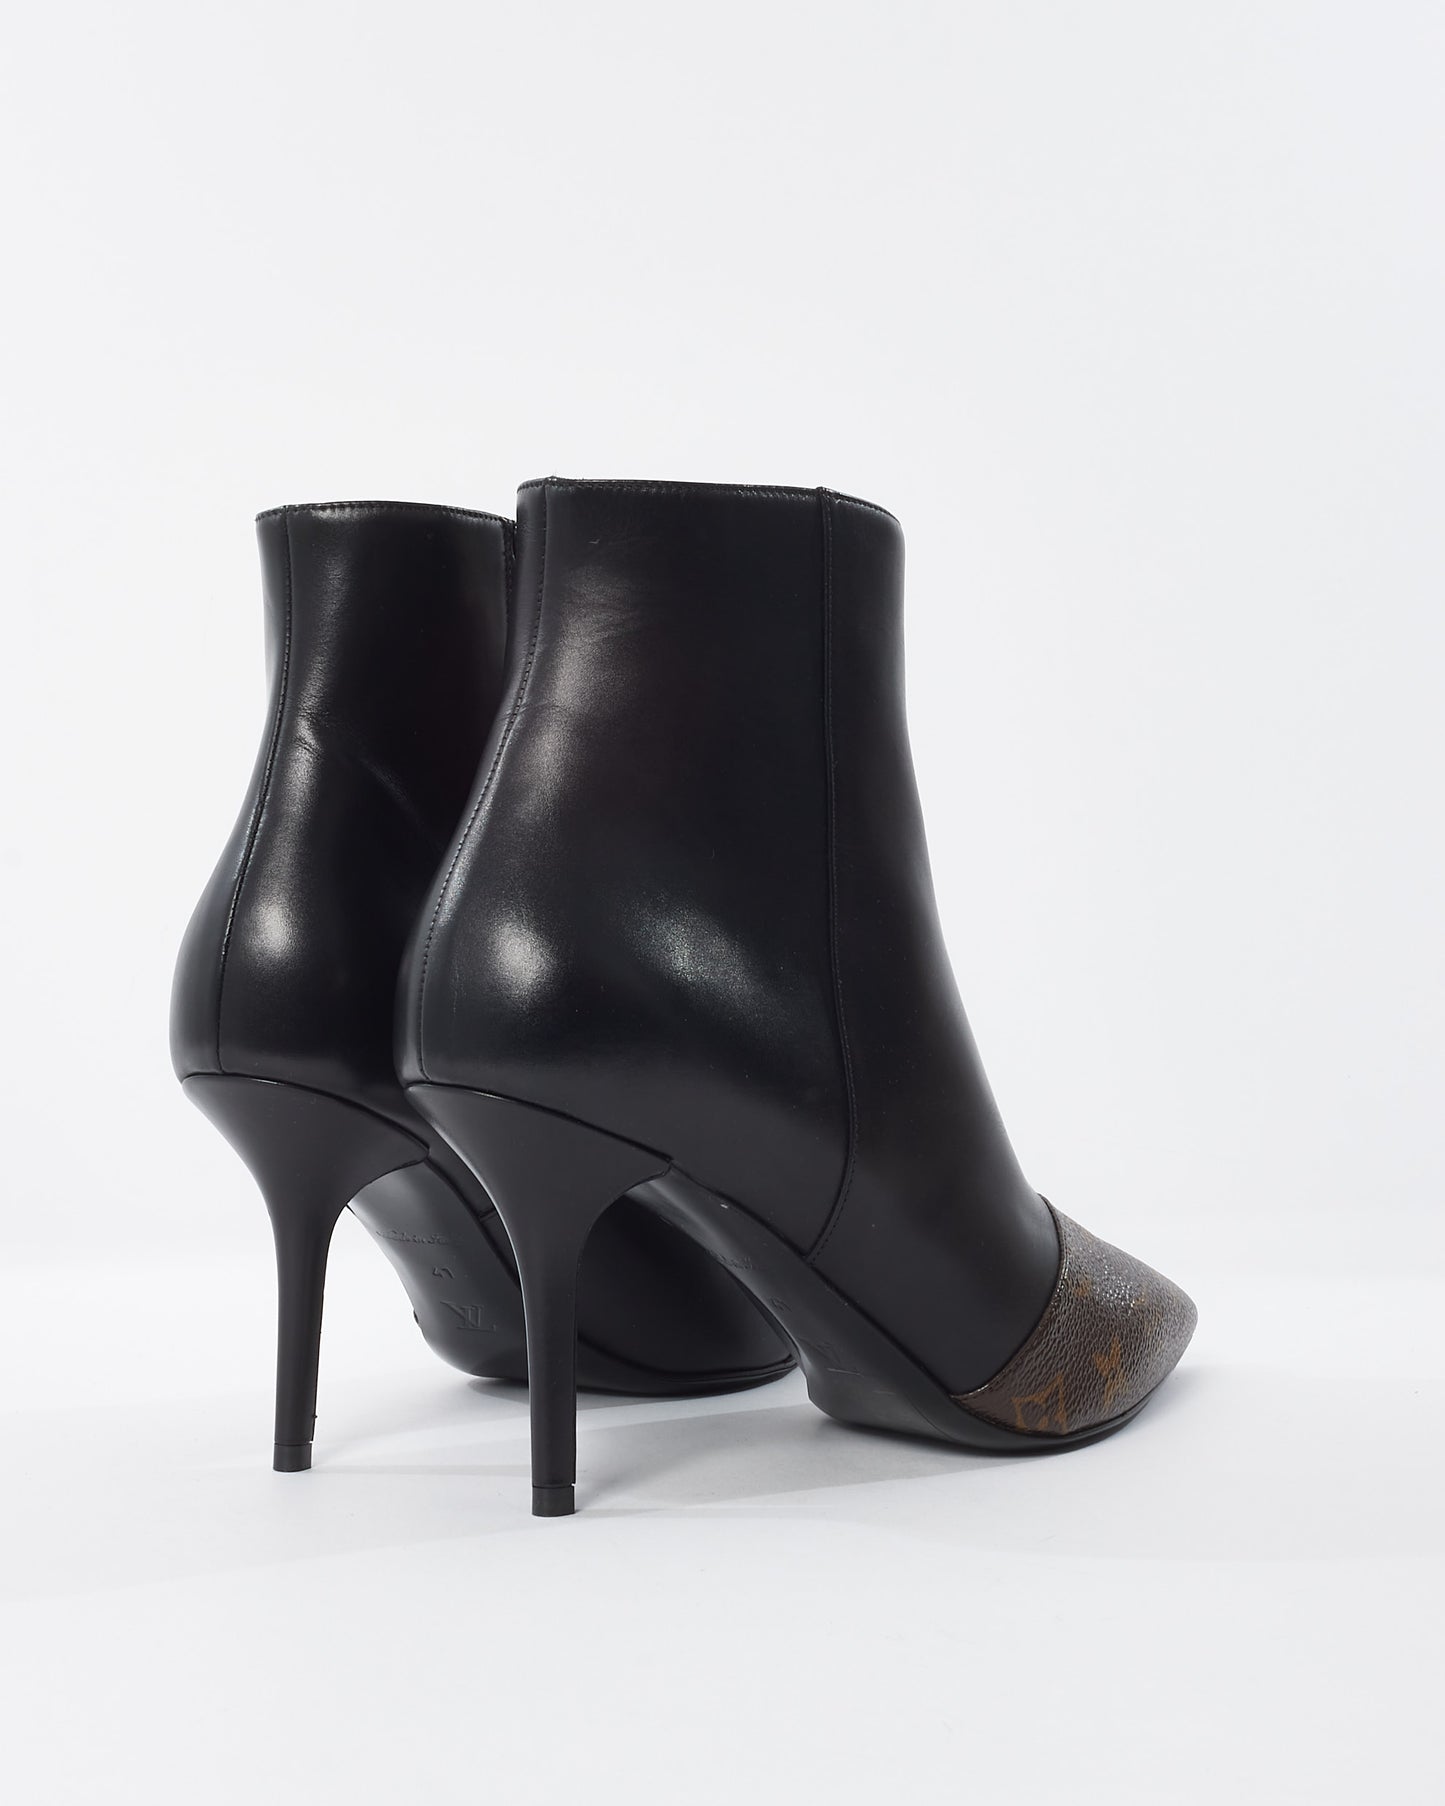 Louis Vuitton Black Leather with Monogram Cherie Ankle Boots - 41